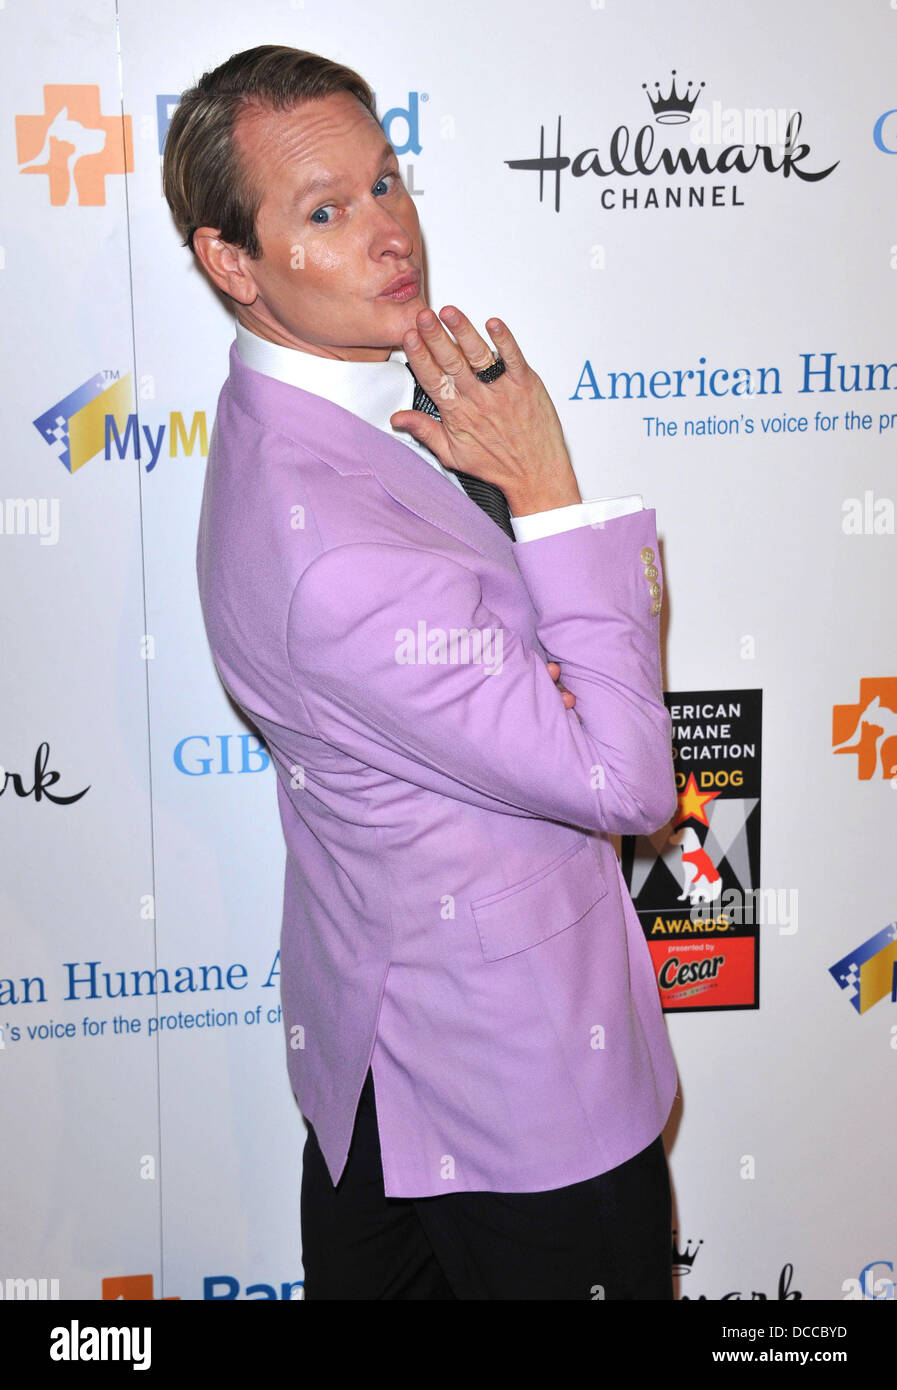 Carson Kressley The American Humane Association's first annual Hero Dog Awards at The Beverly Hilton hotel Beverly Hills, California - 01.10.11 Stock Photo